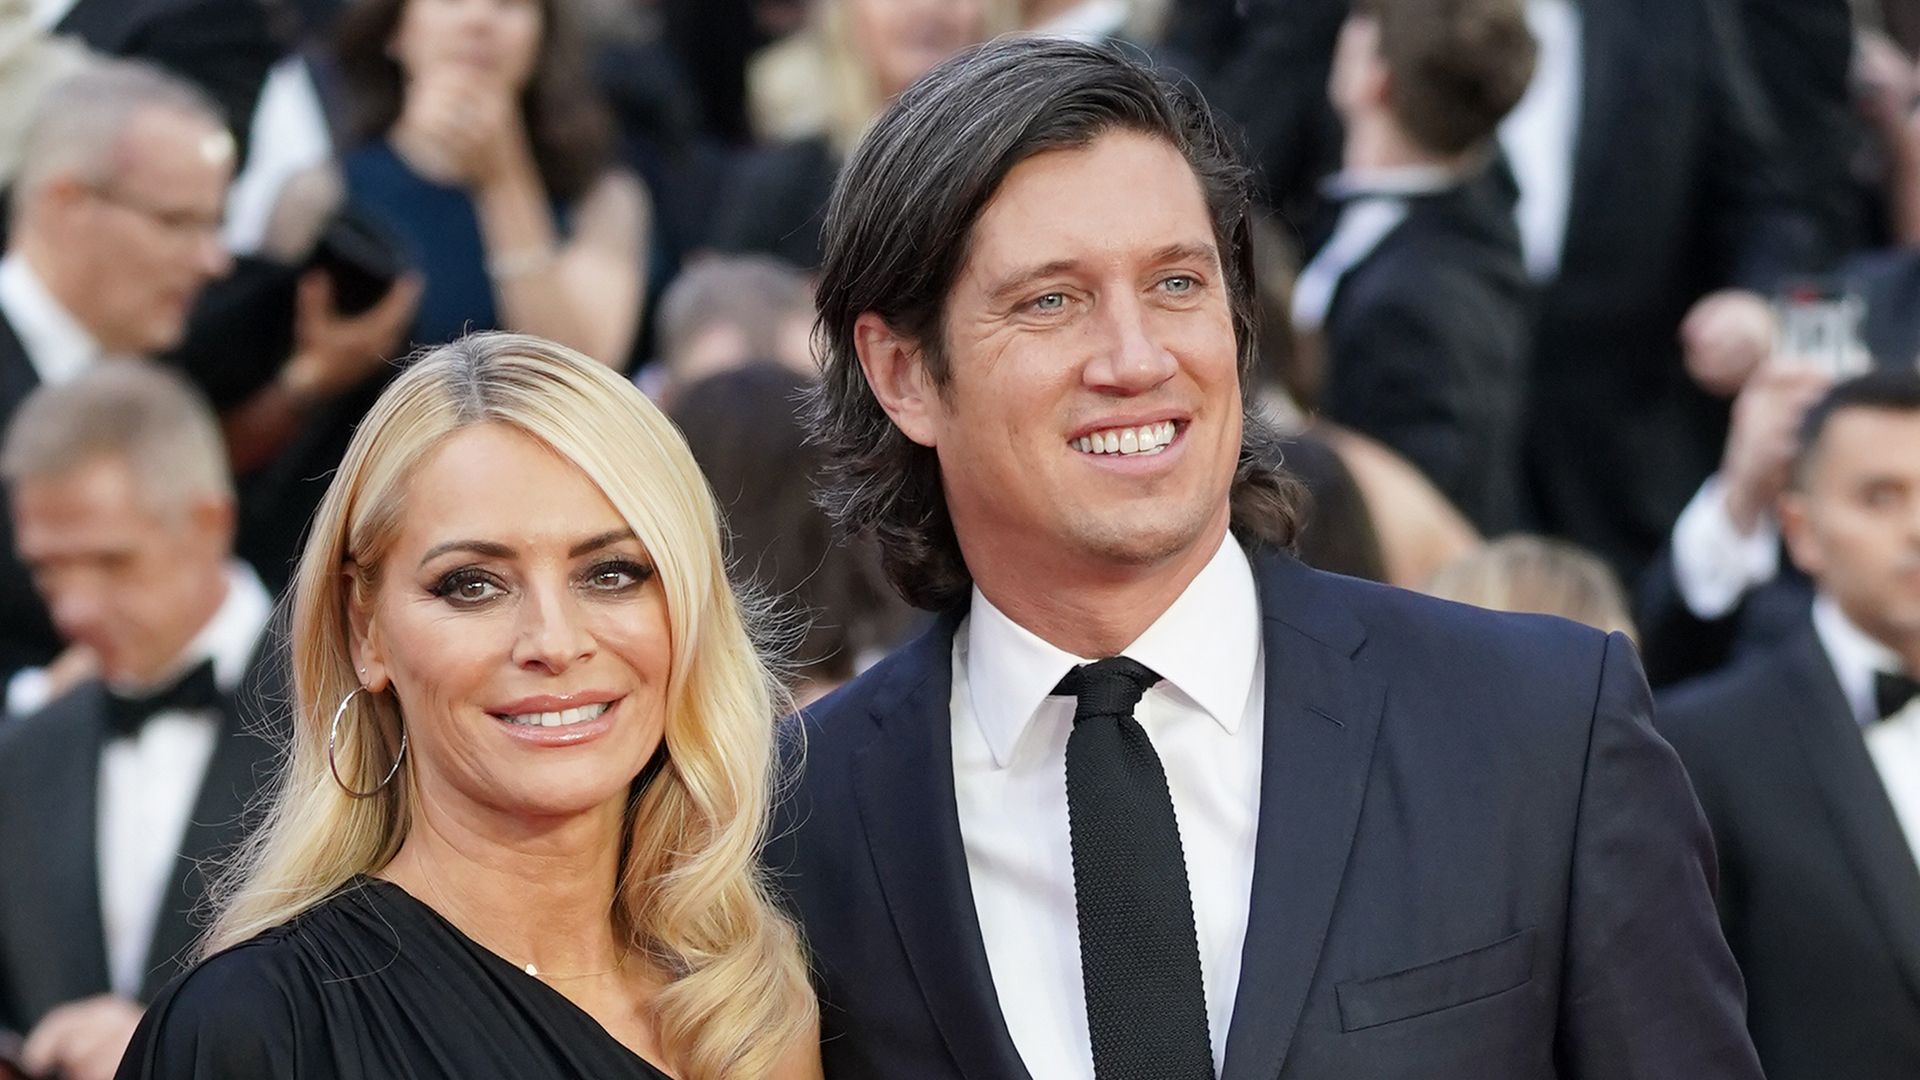 Vernon Kay and Tess Daly at the world premiere of No Time to Die 